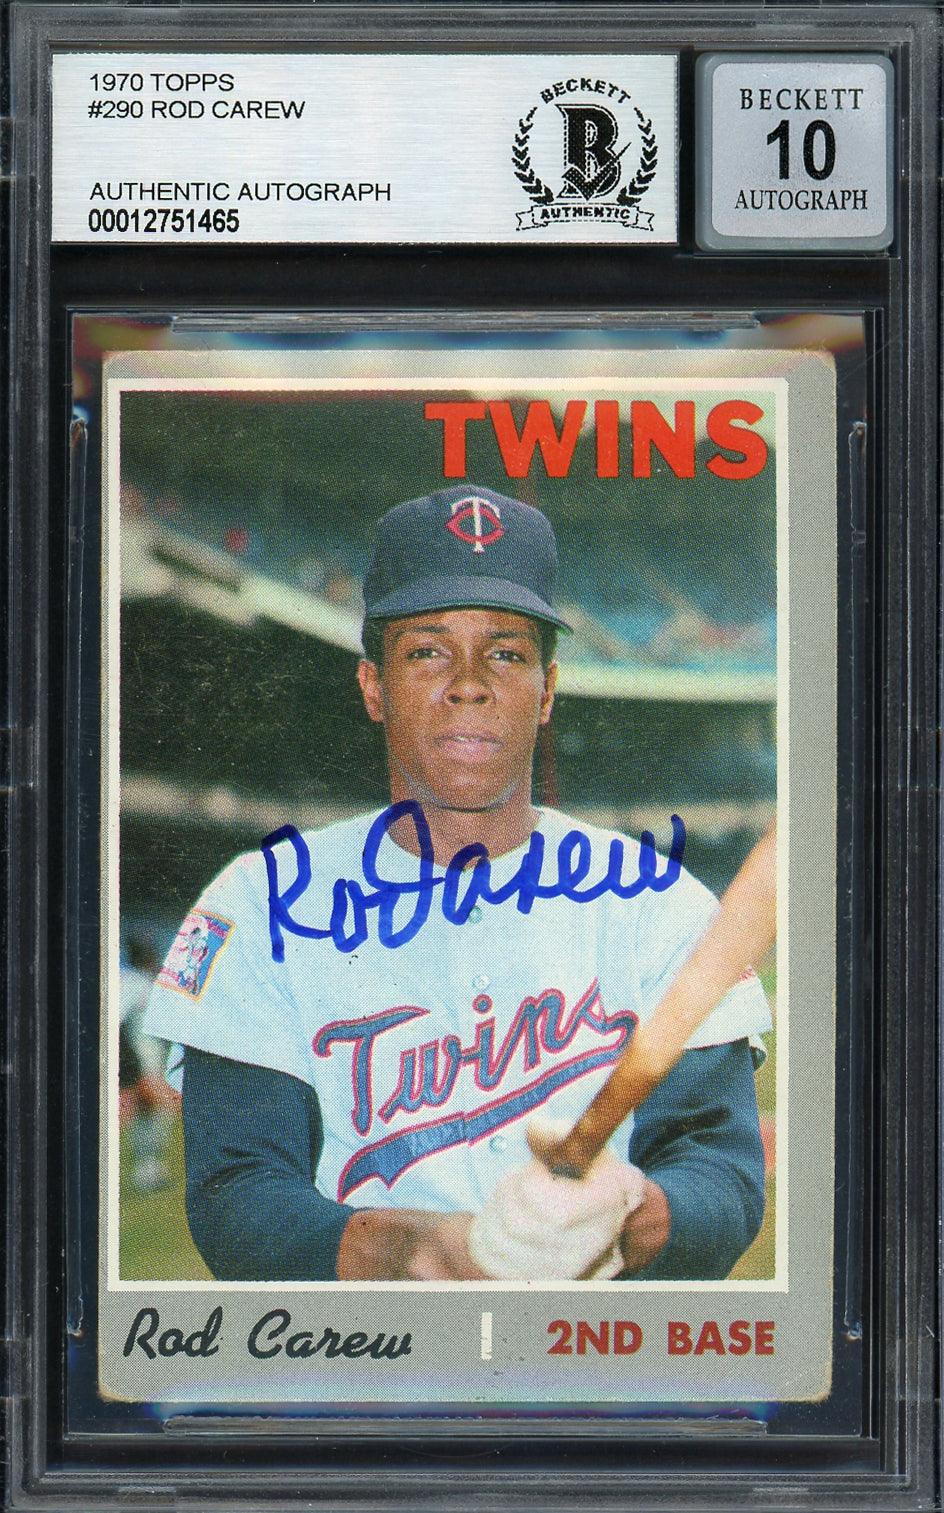 ROD CAREW TOPPS CERTIFIED AUTHENTIC AUTOGRAPHED